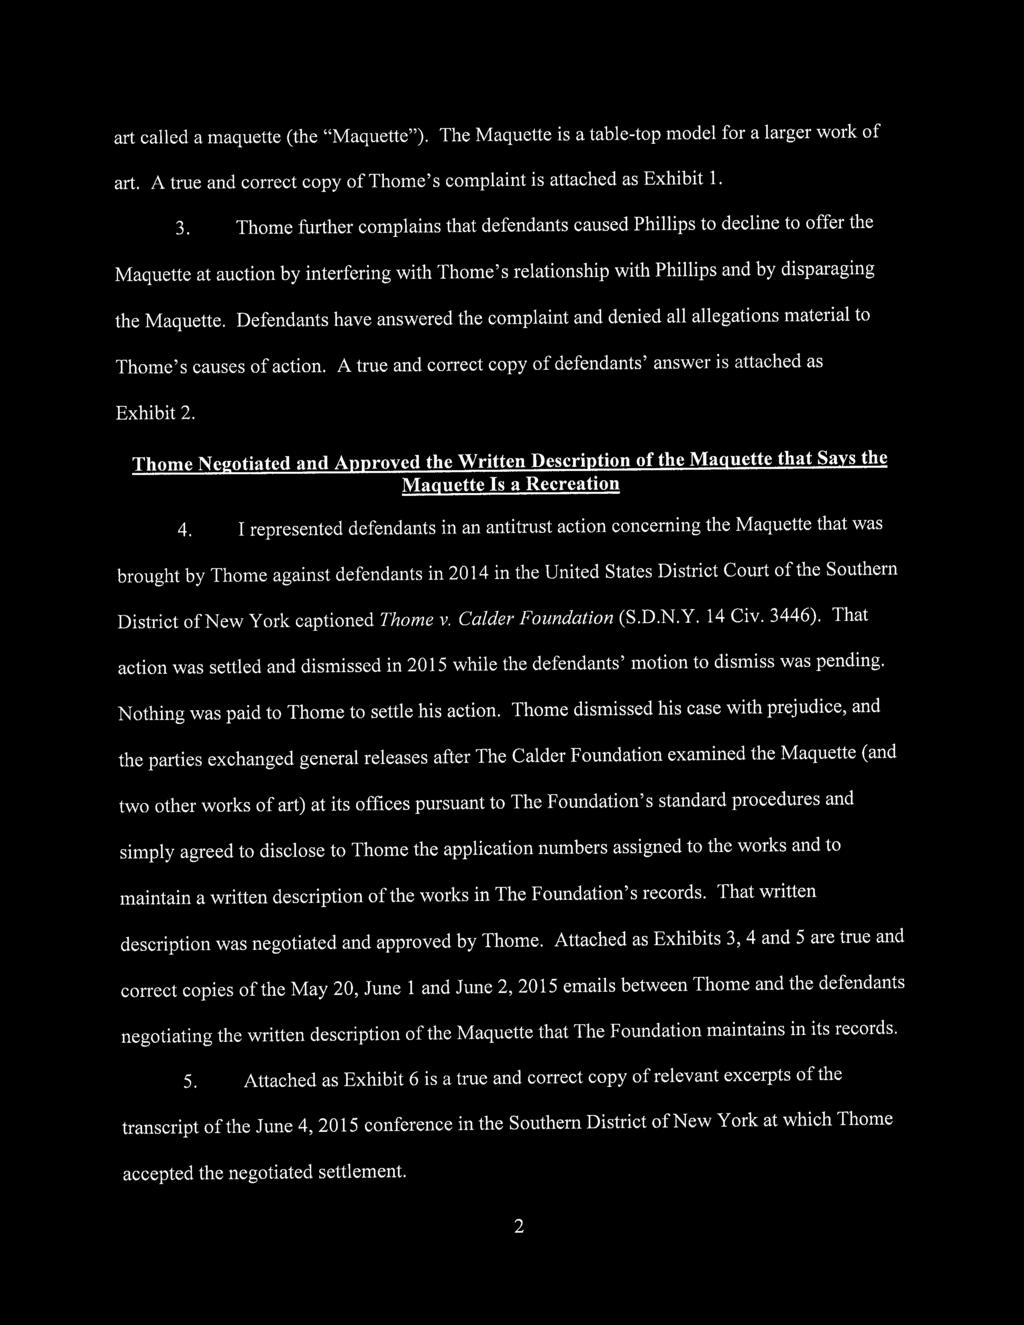 Defendants have answered the complaint and denied all allegations material to Thome's causes of action. A true and correct copy of defendants' answer is attached as Exhibit 2.